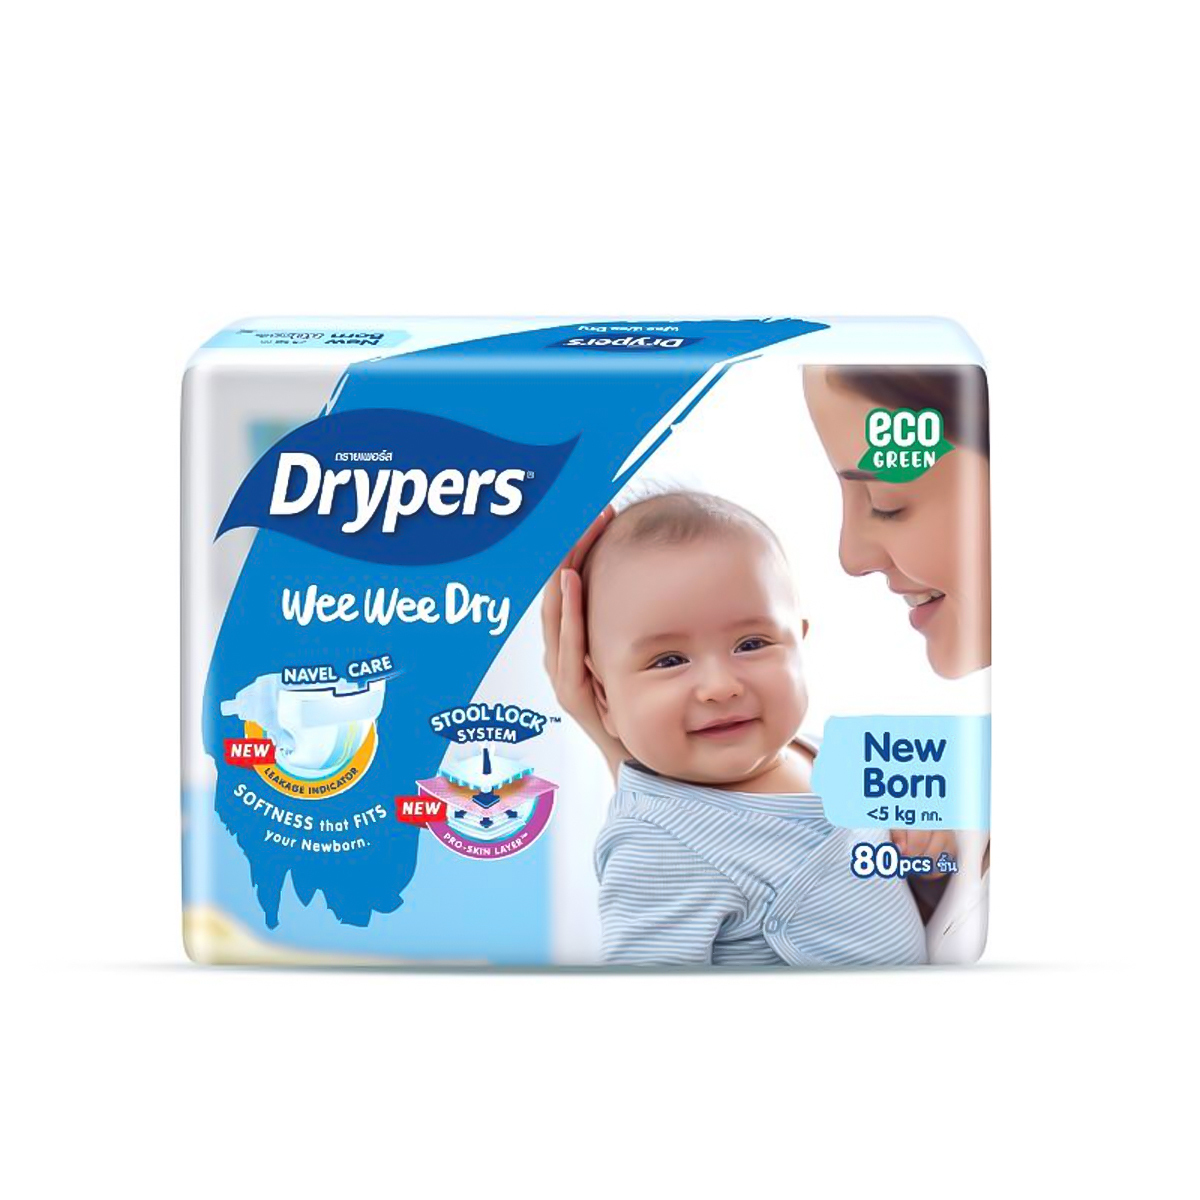 Drypers Wee Wee Dry New Born 80Pcs